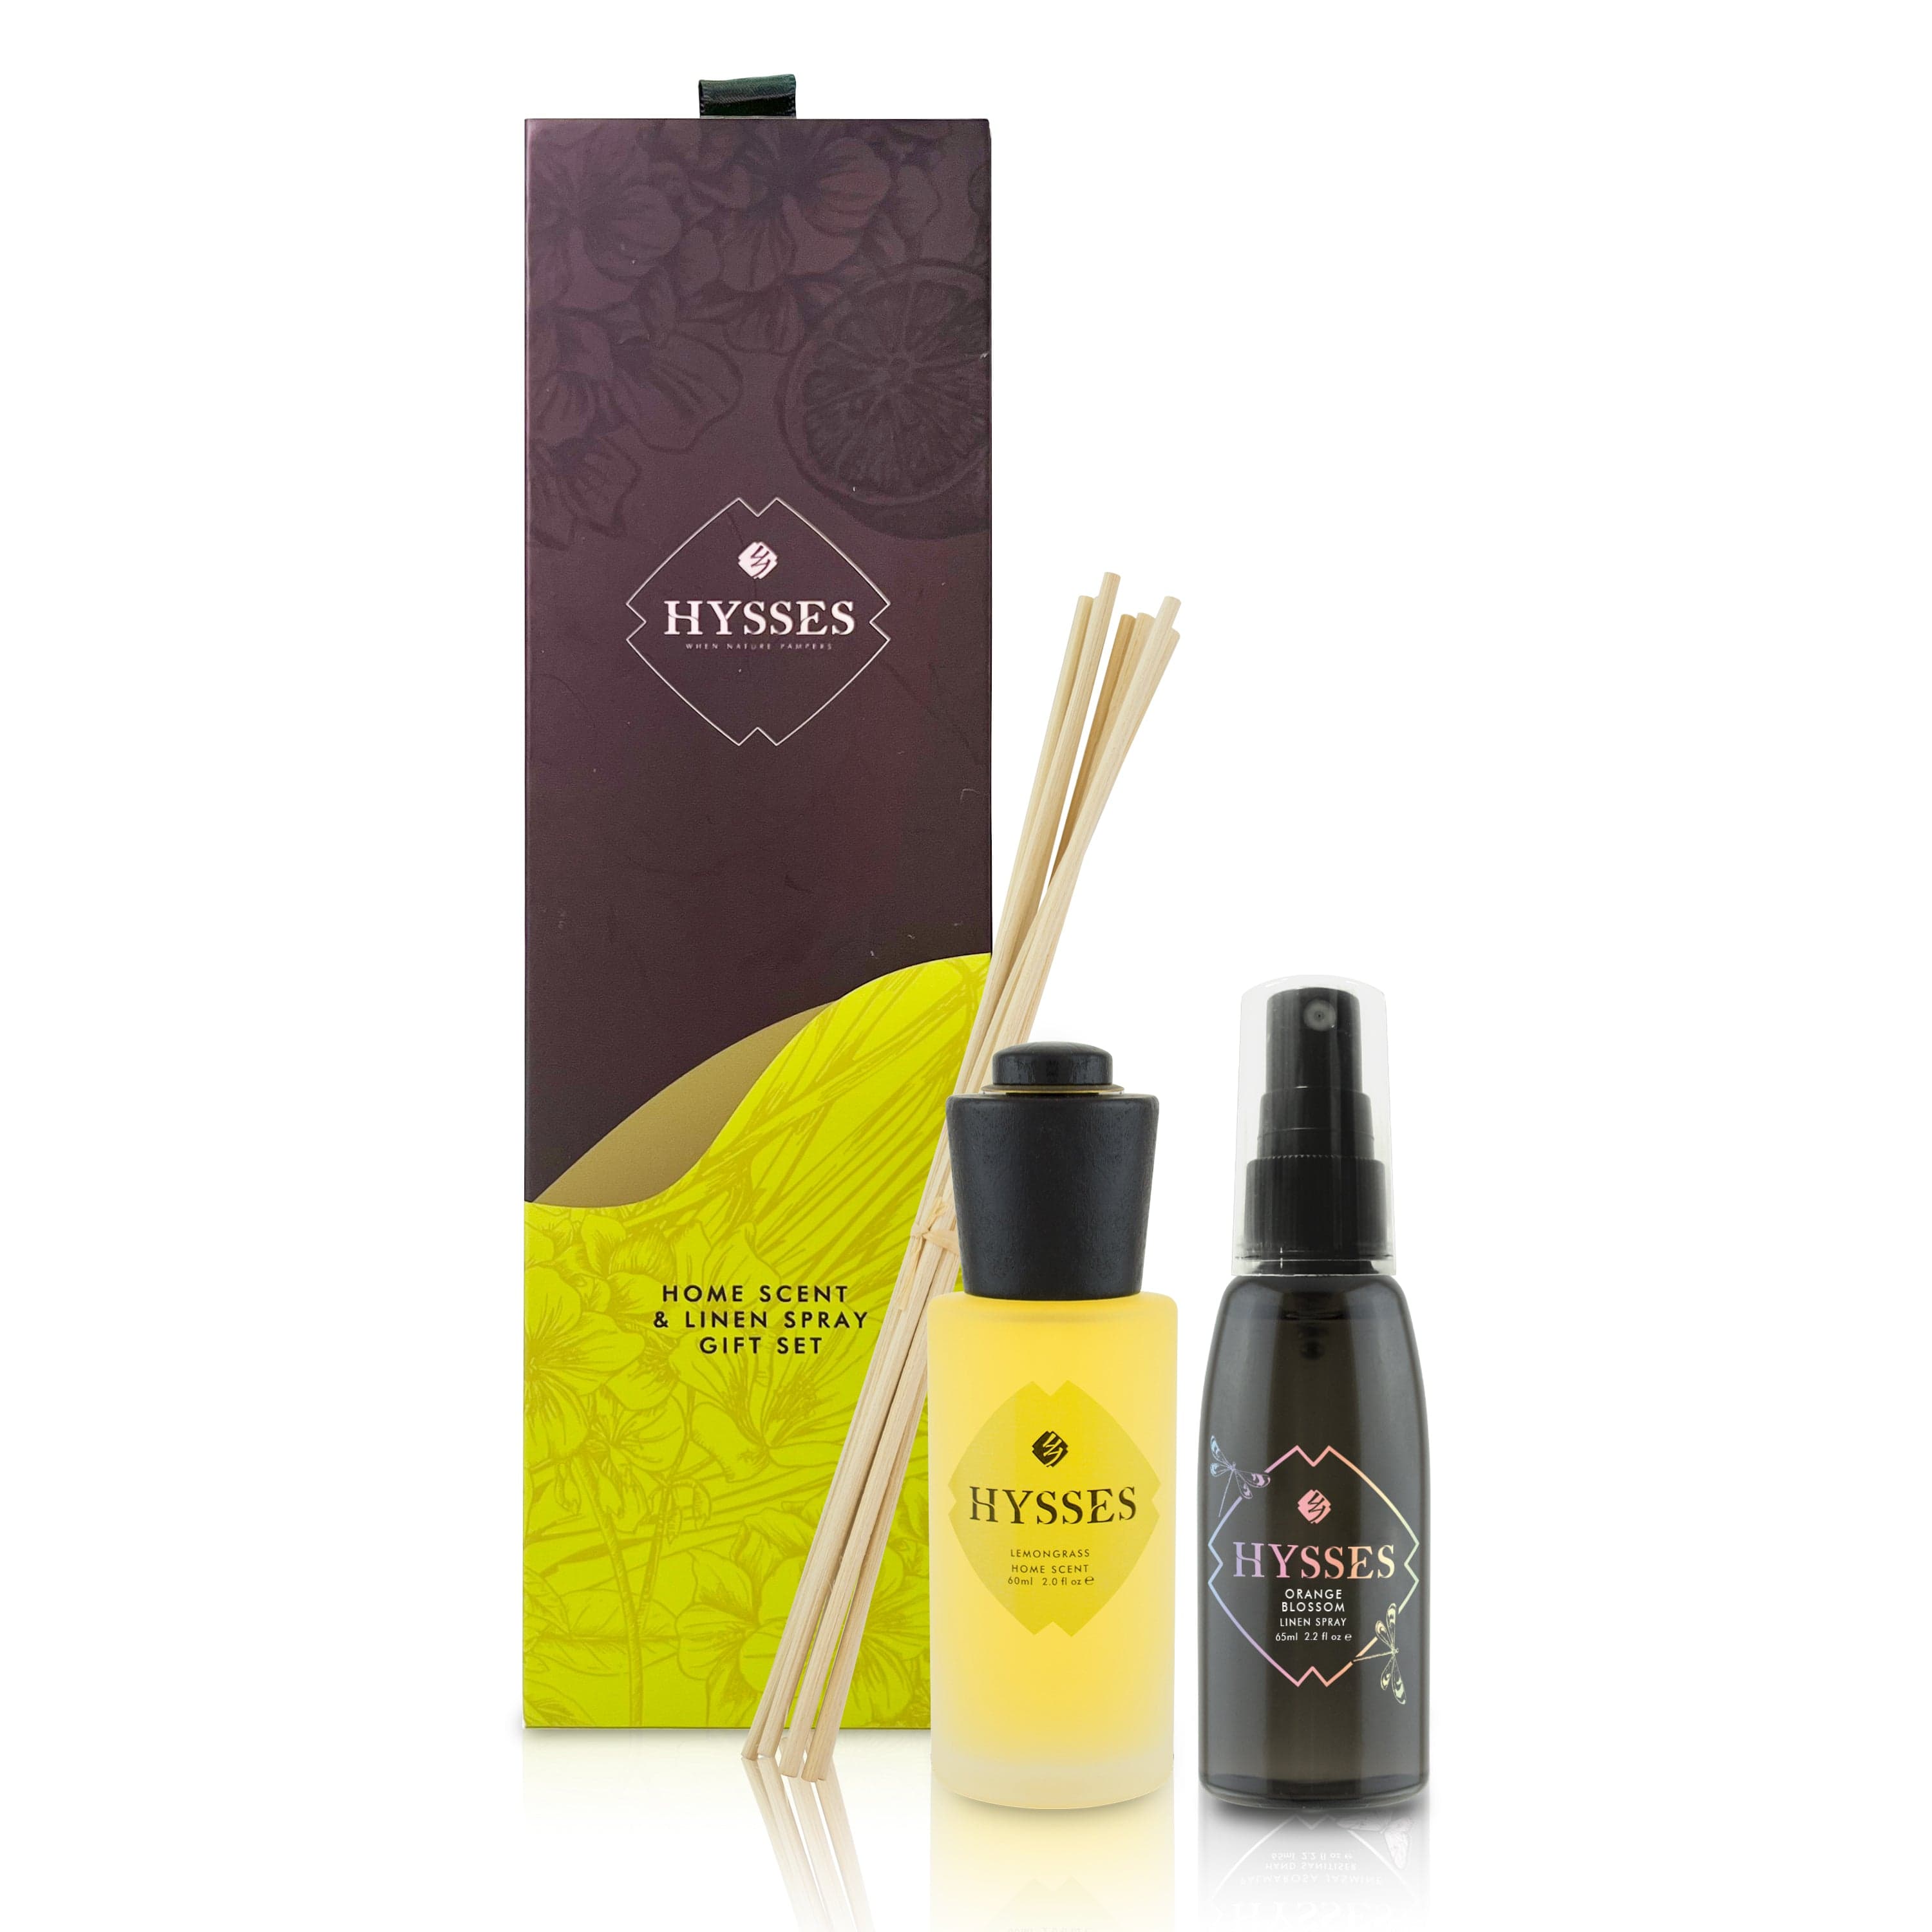 Hysses Home Scents Orange Blossom & Lemongrass Linen Spray and Home Scent Gift Set of 2